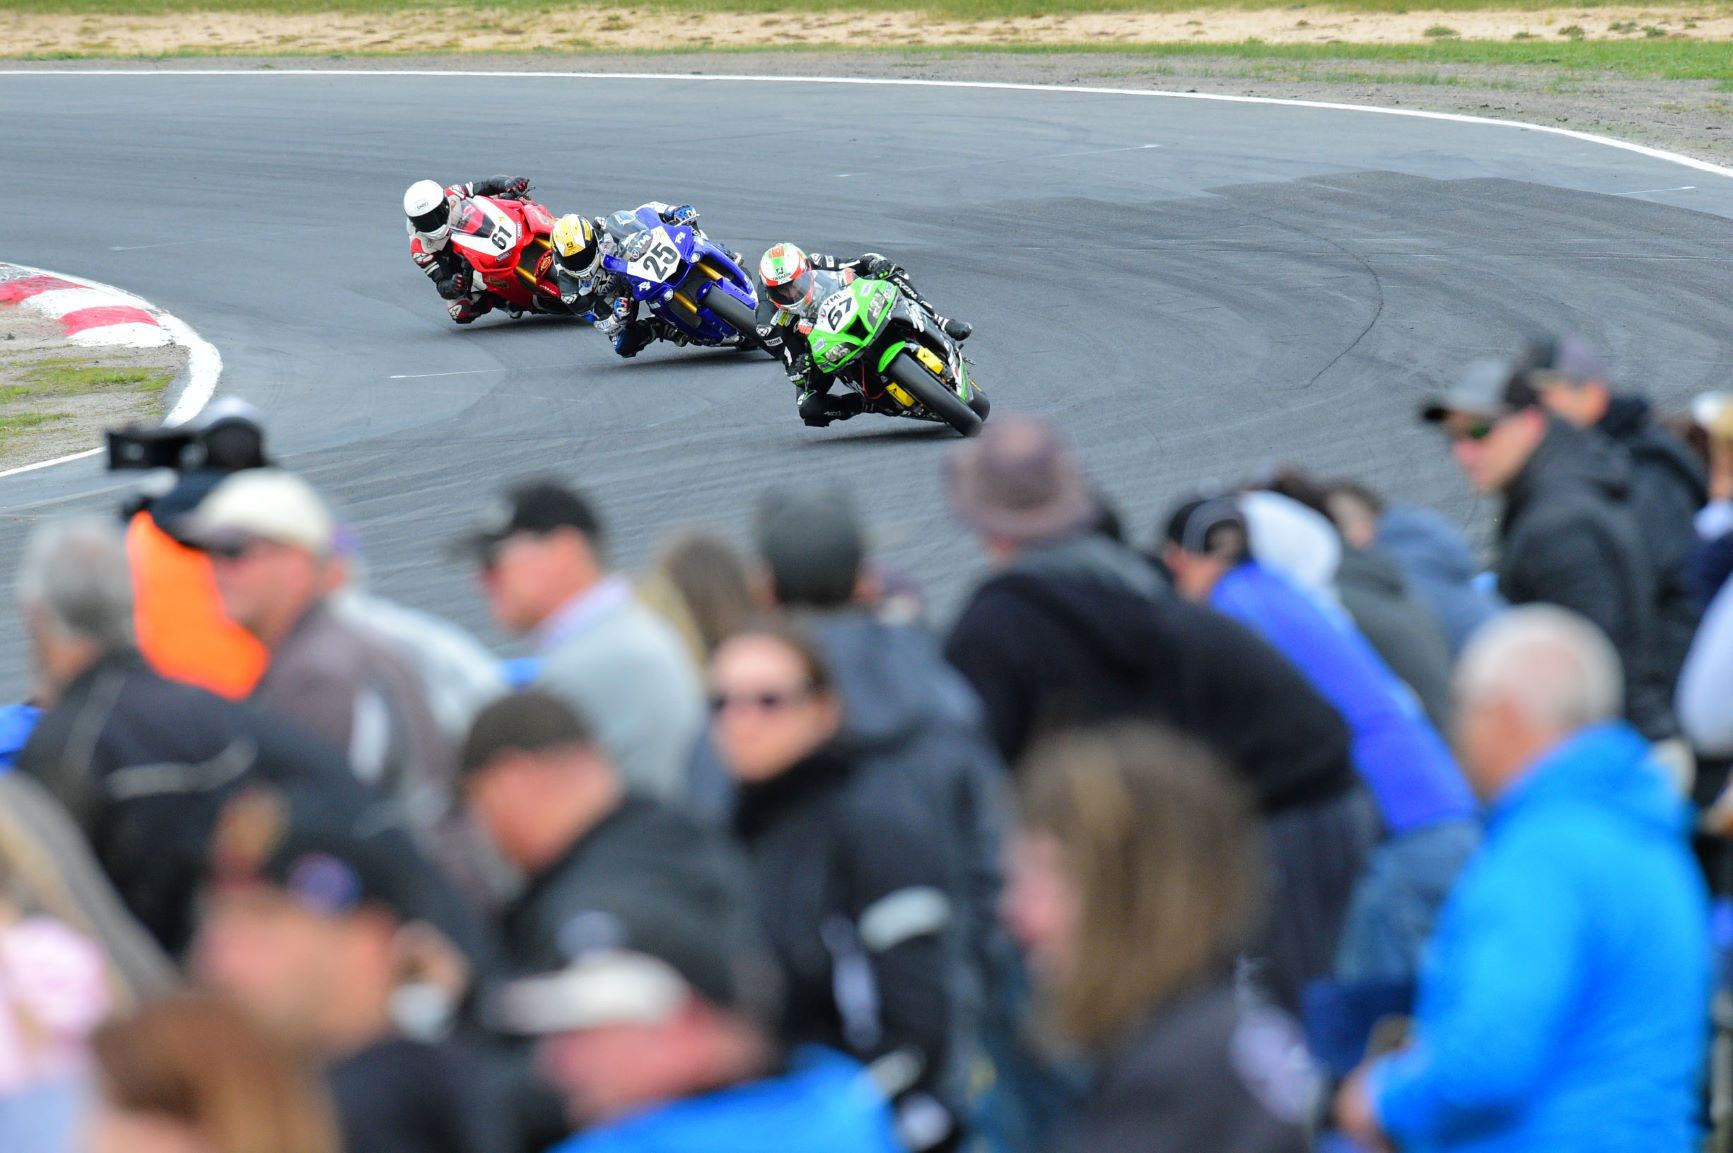 Spectators will be able to attend this weekend's Australian Superbike Championship event at Winton Motor Raceway. Photo courtesy ASBK.